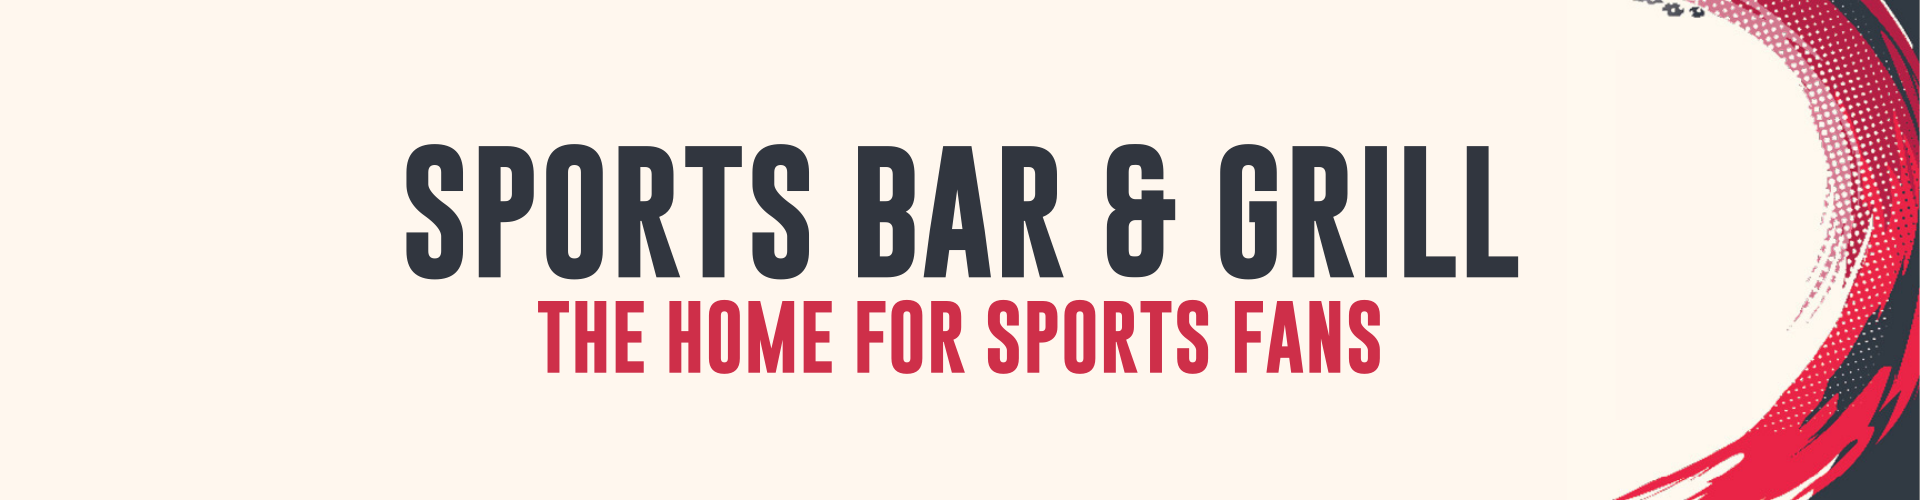 Sports Bar and Grill Beer - the home for sports fans